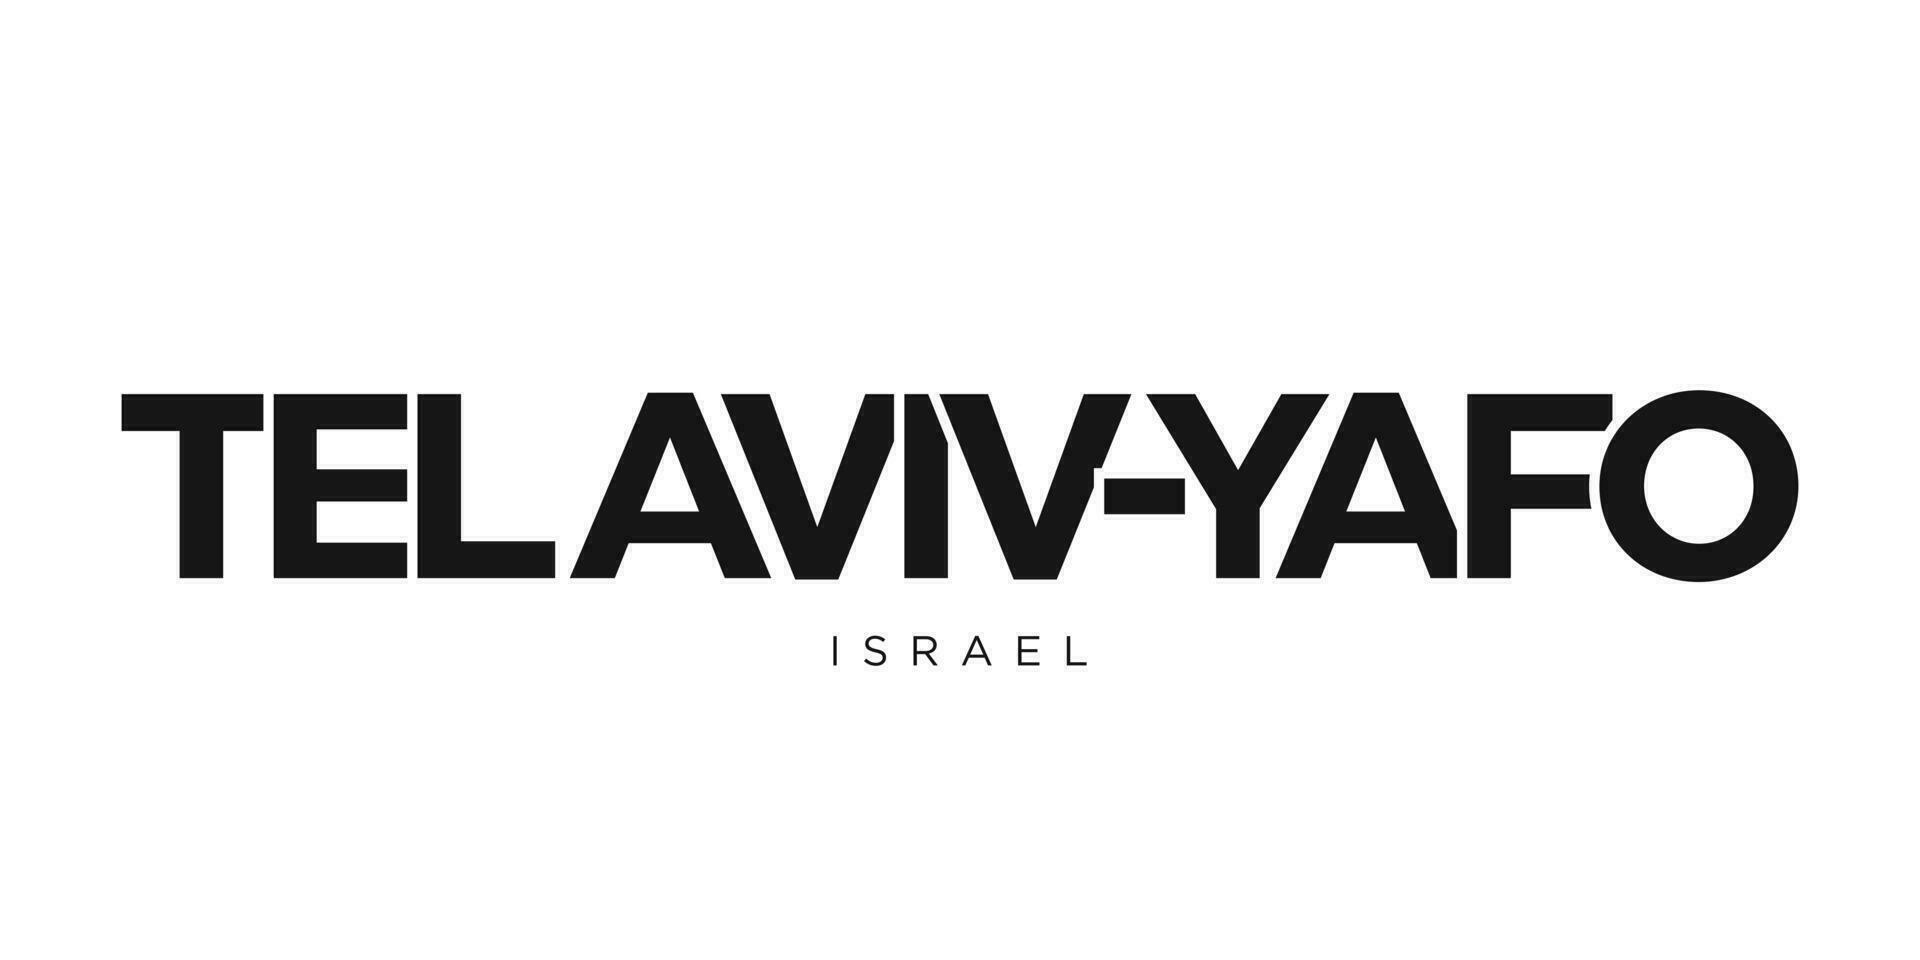 Tel Aviv-Yafo in the Israel emblem. The design features a geometric style, vector illustration with bold typography in a modern font. The graphic slogan lettering.